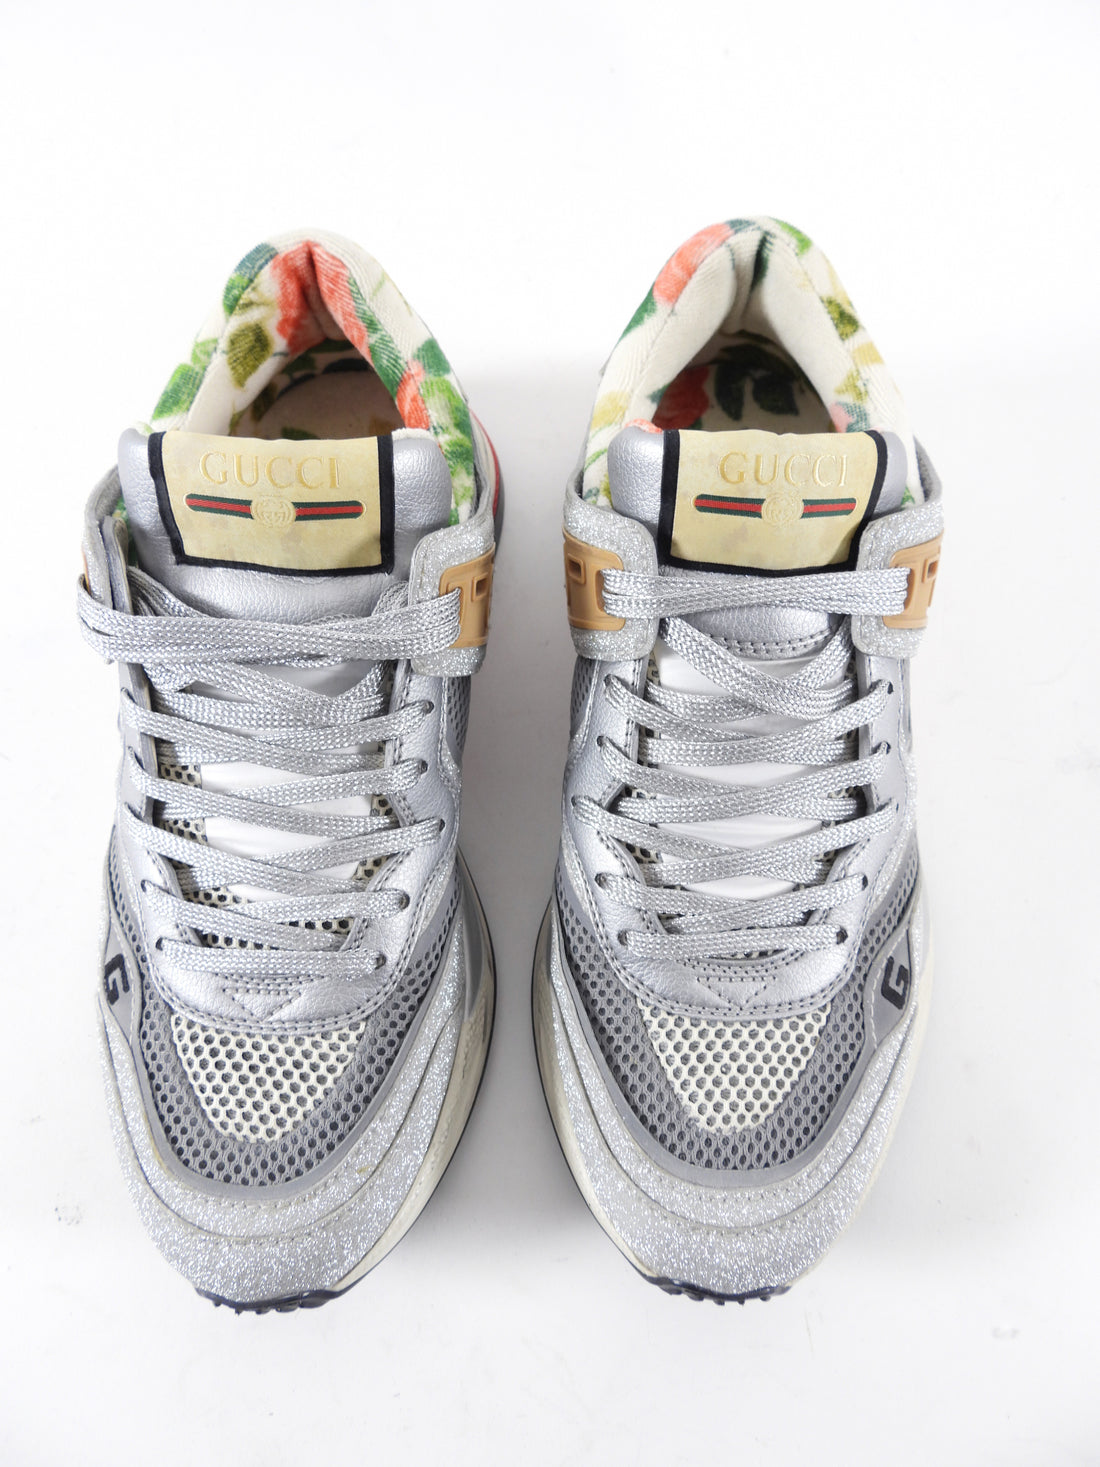 Gucci Silver Floral Ultrapace Sneakers - USA 8